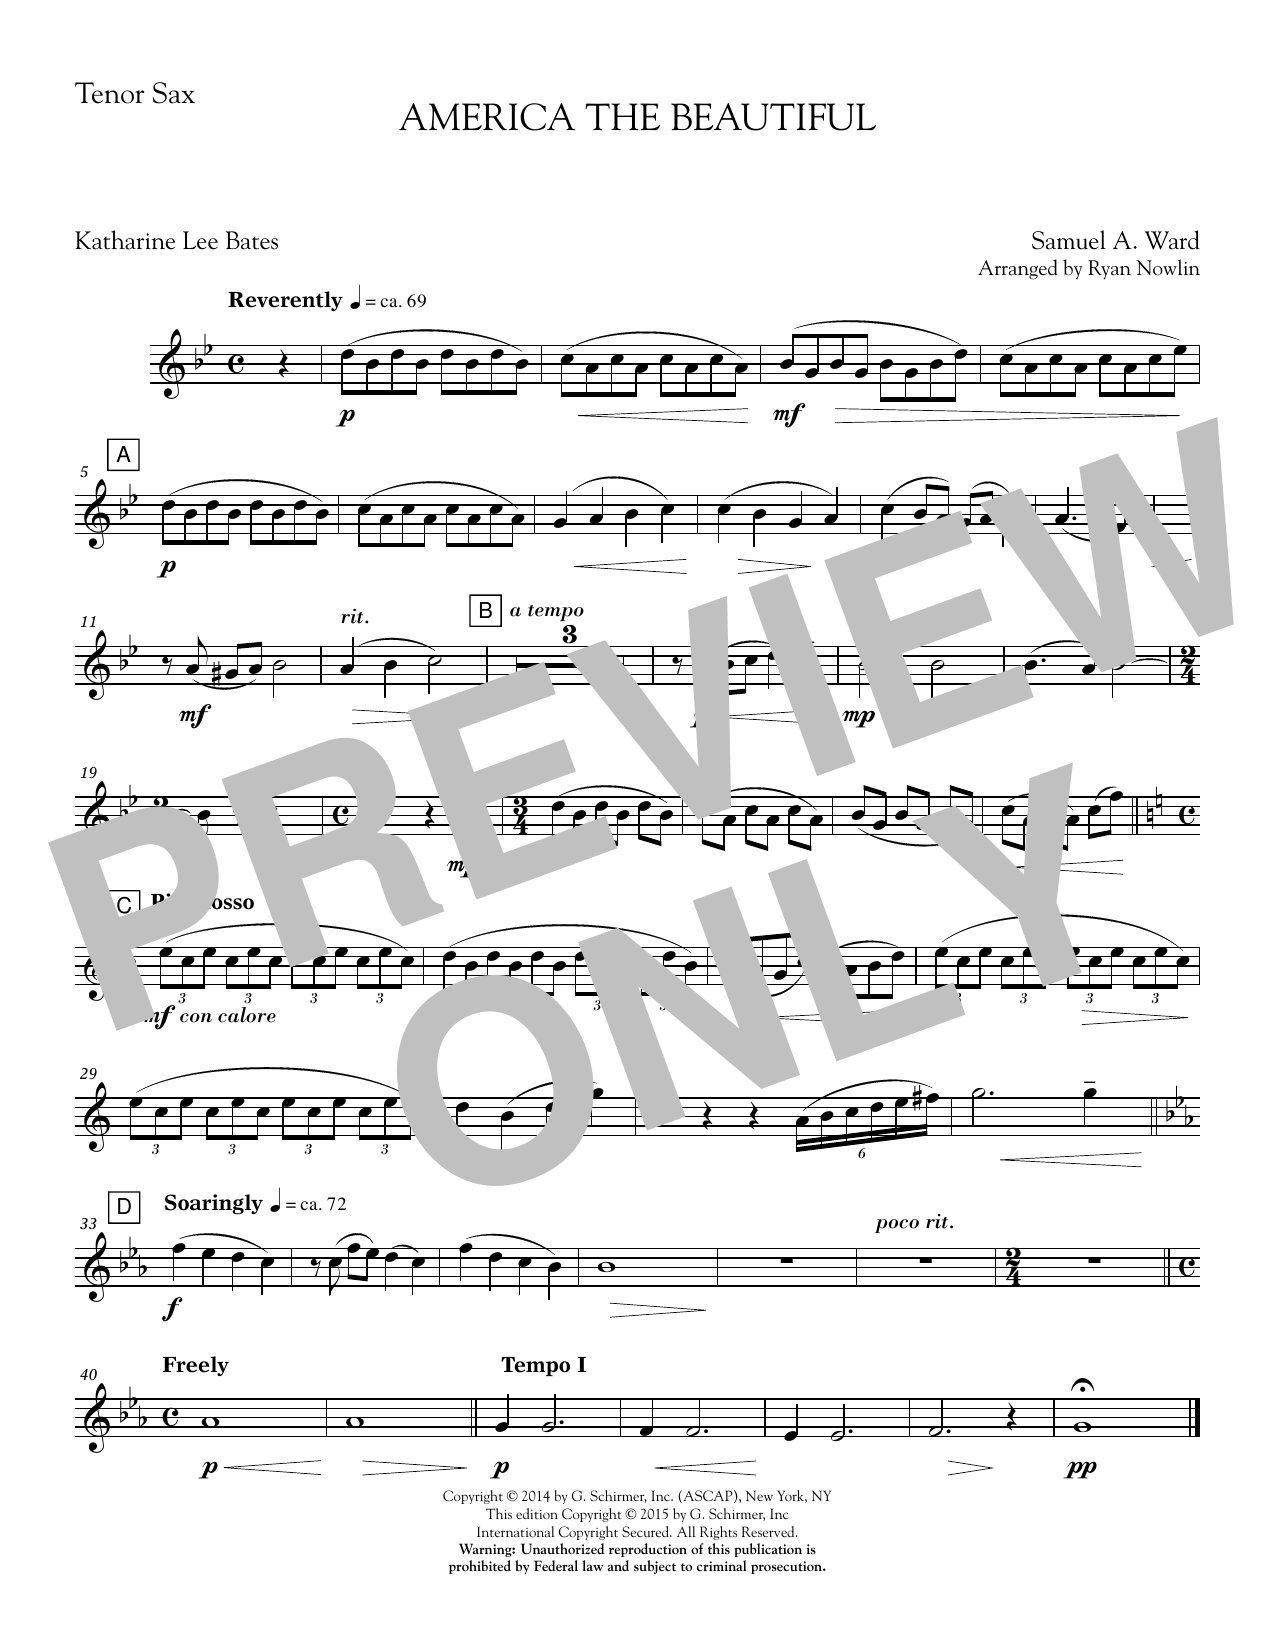 Ryan Nowlin America, the Beautiful - Tenor Saxophone sheet music notes and chords. Download Printable PDF.